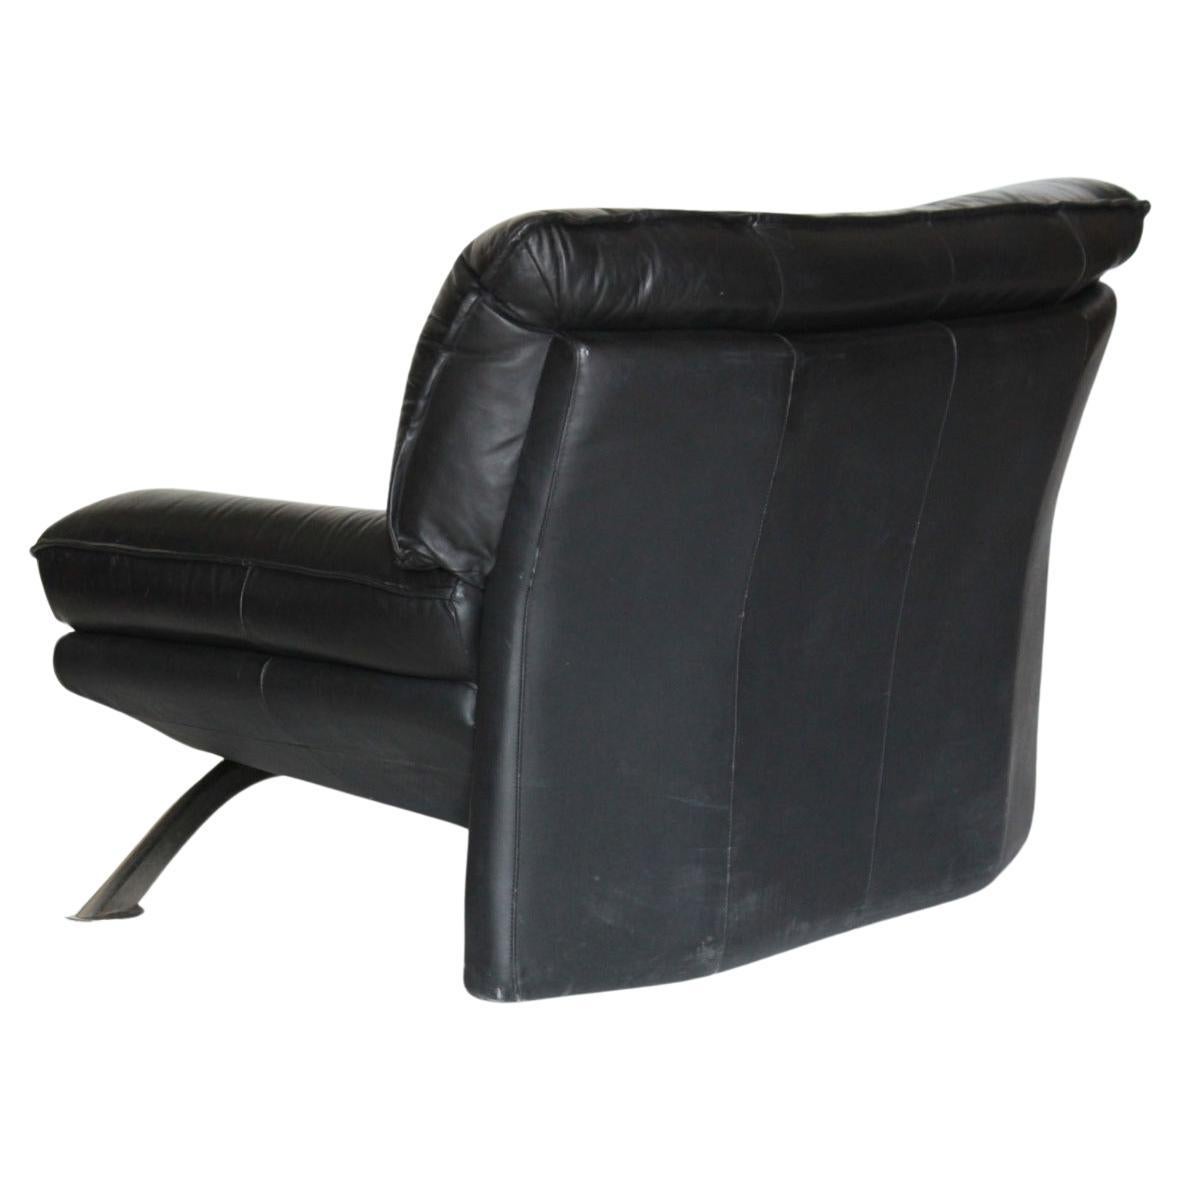 Post-Modern Large Leather Italian Chair by Nicoletti Salotti for AVANTI, Italy 1980  's For Sale